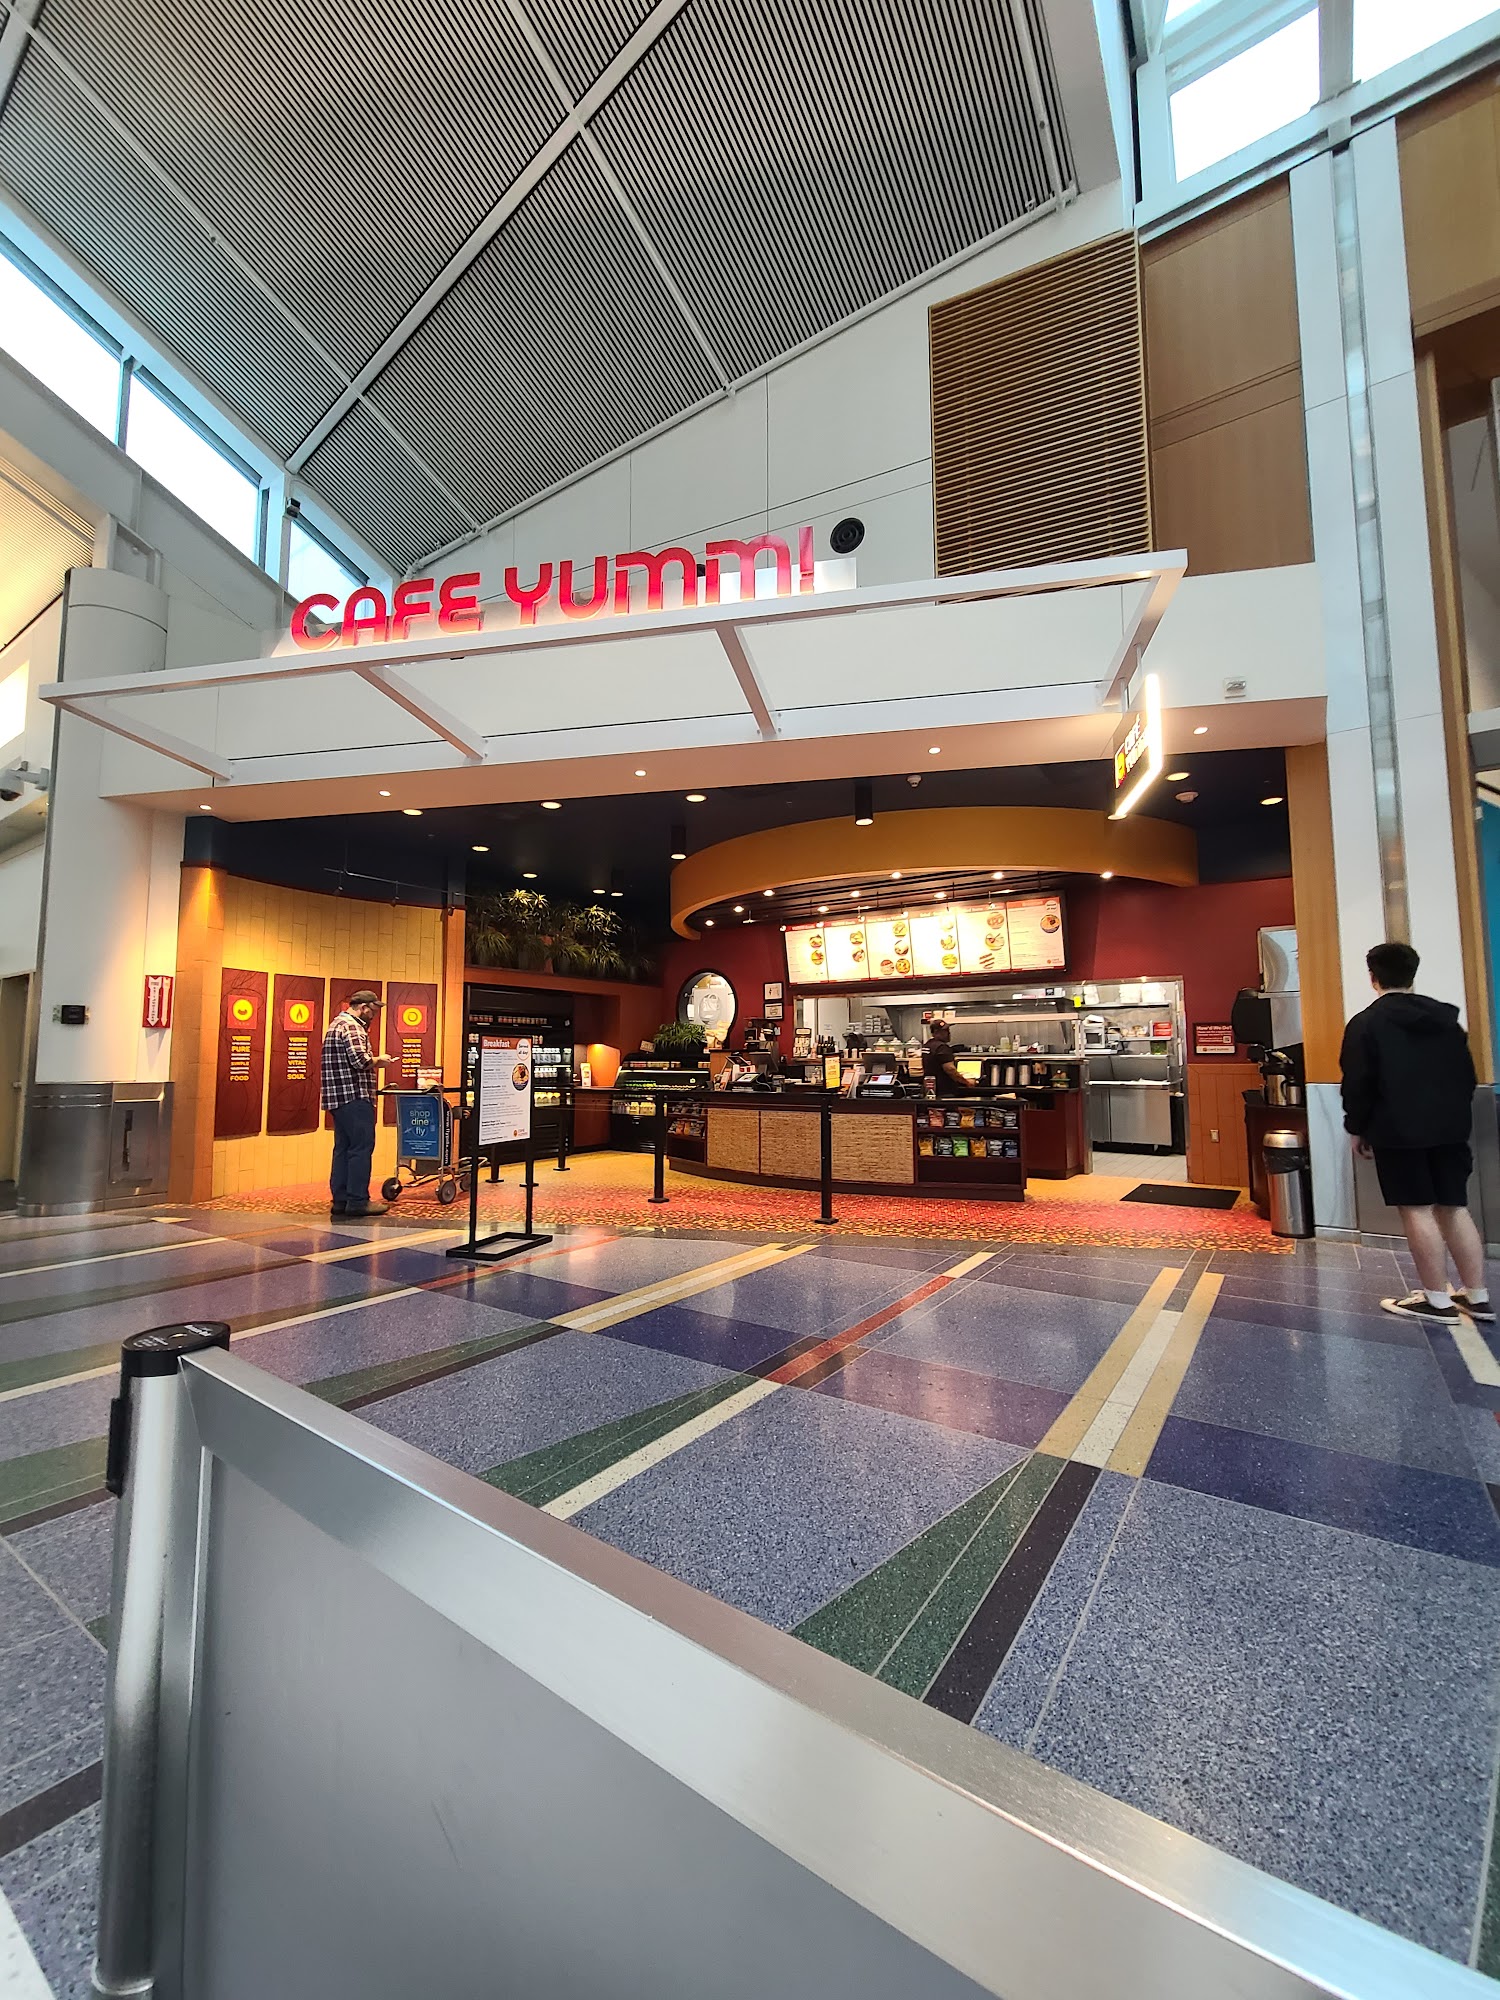 Cafe Yumm! - PDX Airport